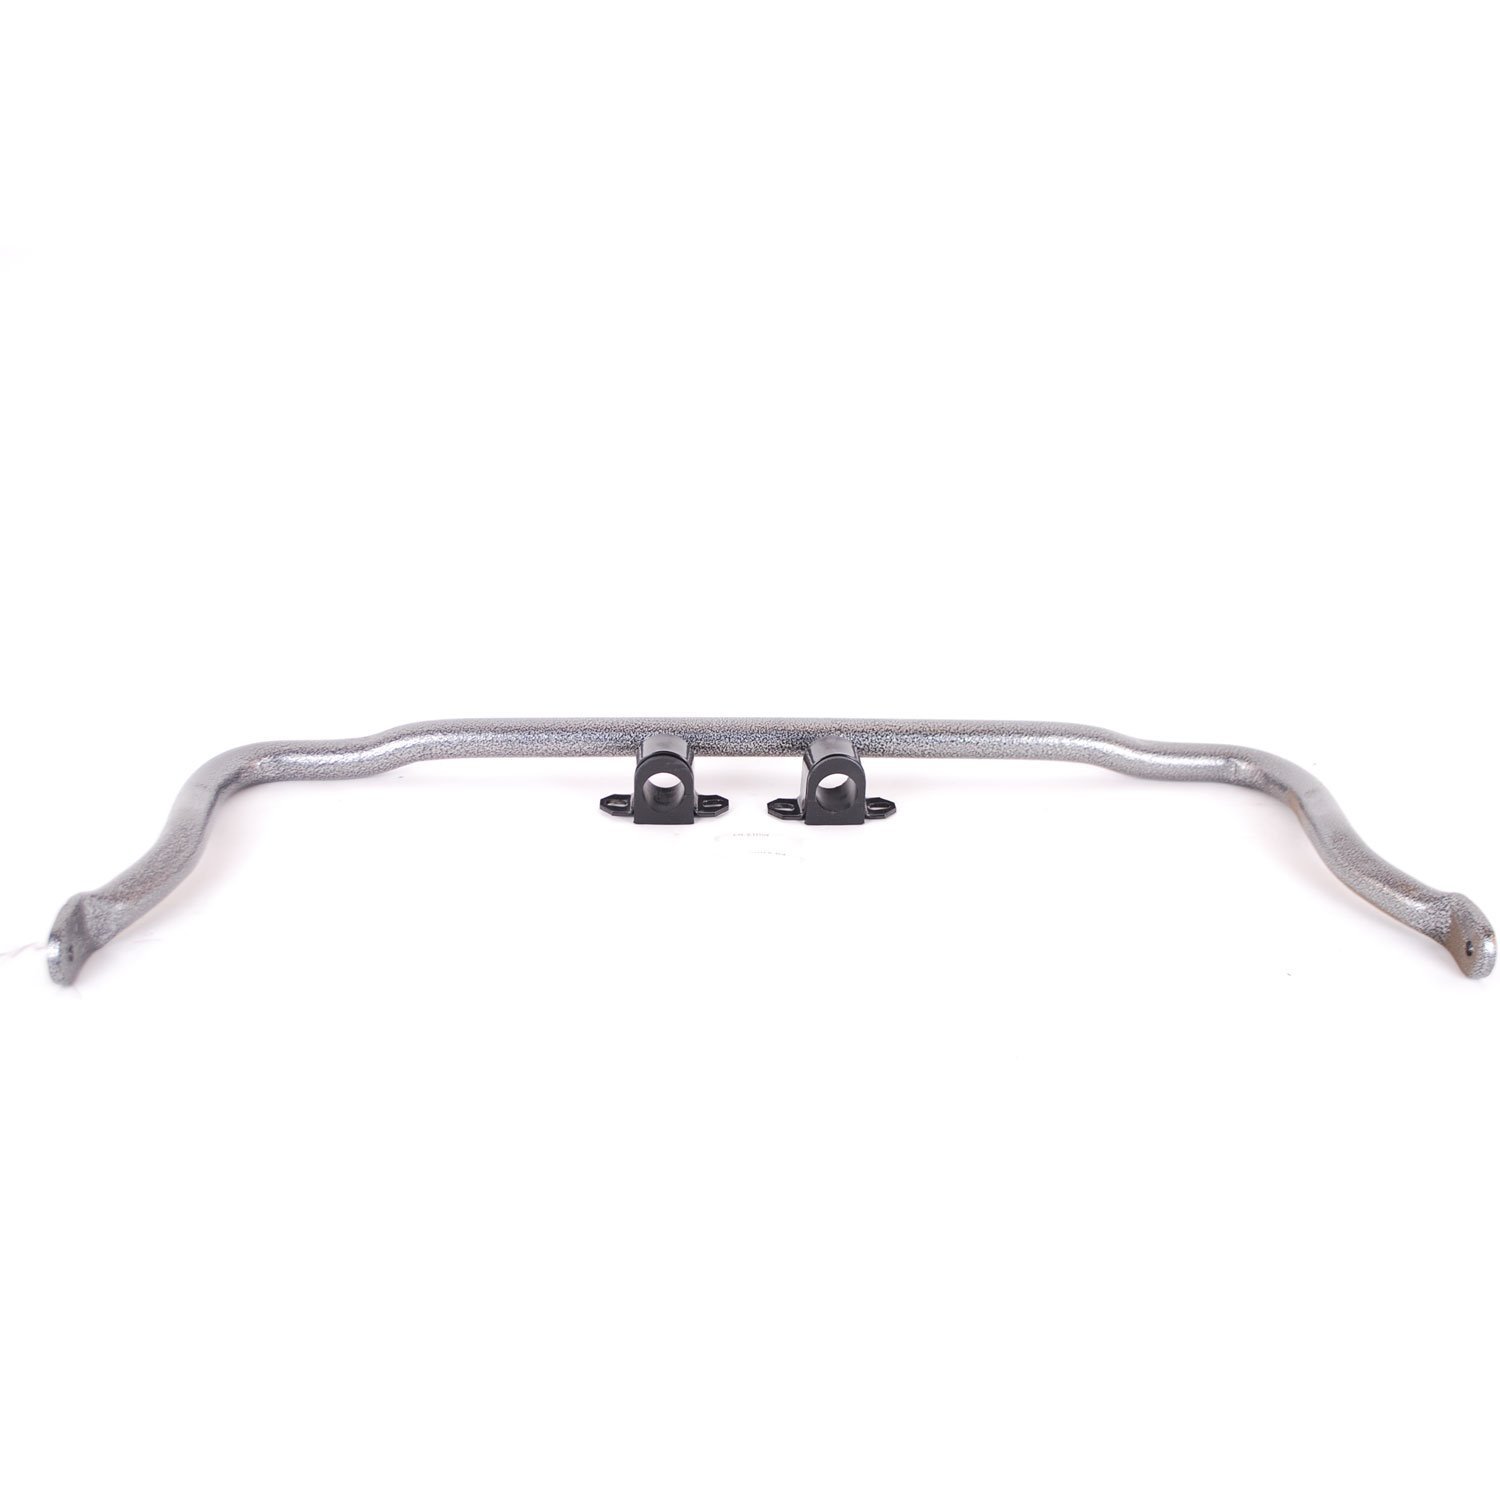 Front Sway Bar for 2011-2016 Ford F-250/F-350 Super Duty 2WD